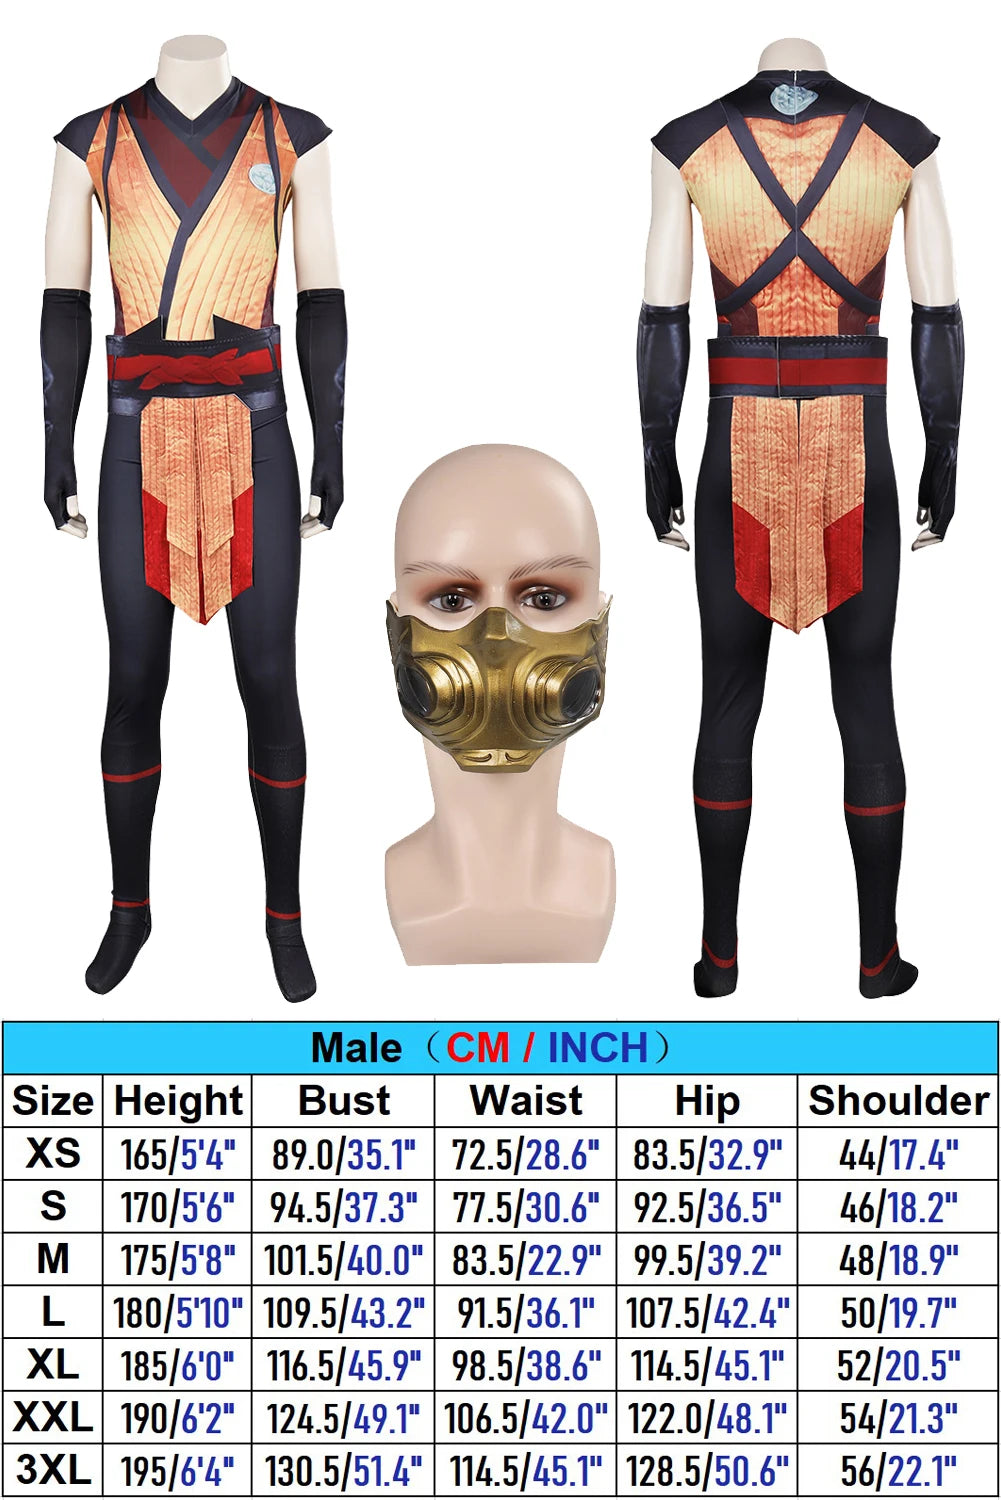 Scorpion Cosplay Fantasy Print Jumpsuit Mask - Inspired by Anime Game Mortal Kombat, Ideal for Costume Disguise and Adult Men's Cosplay Roleplay Outfits-Clothes Mask-XS-